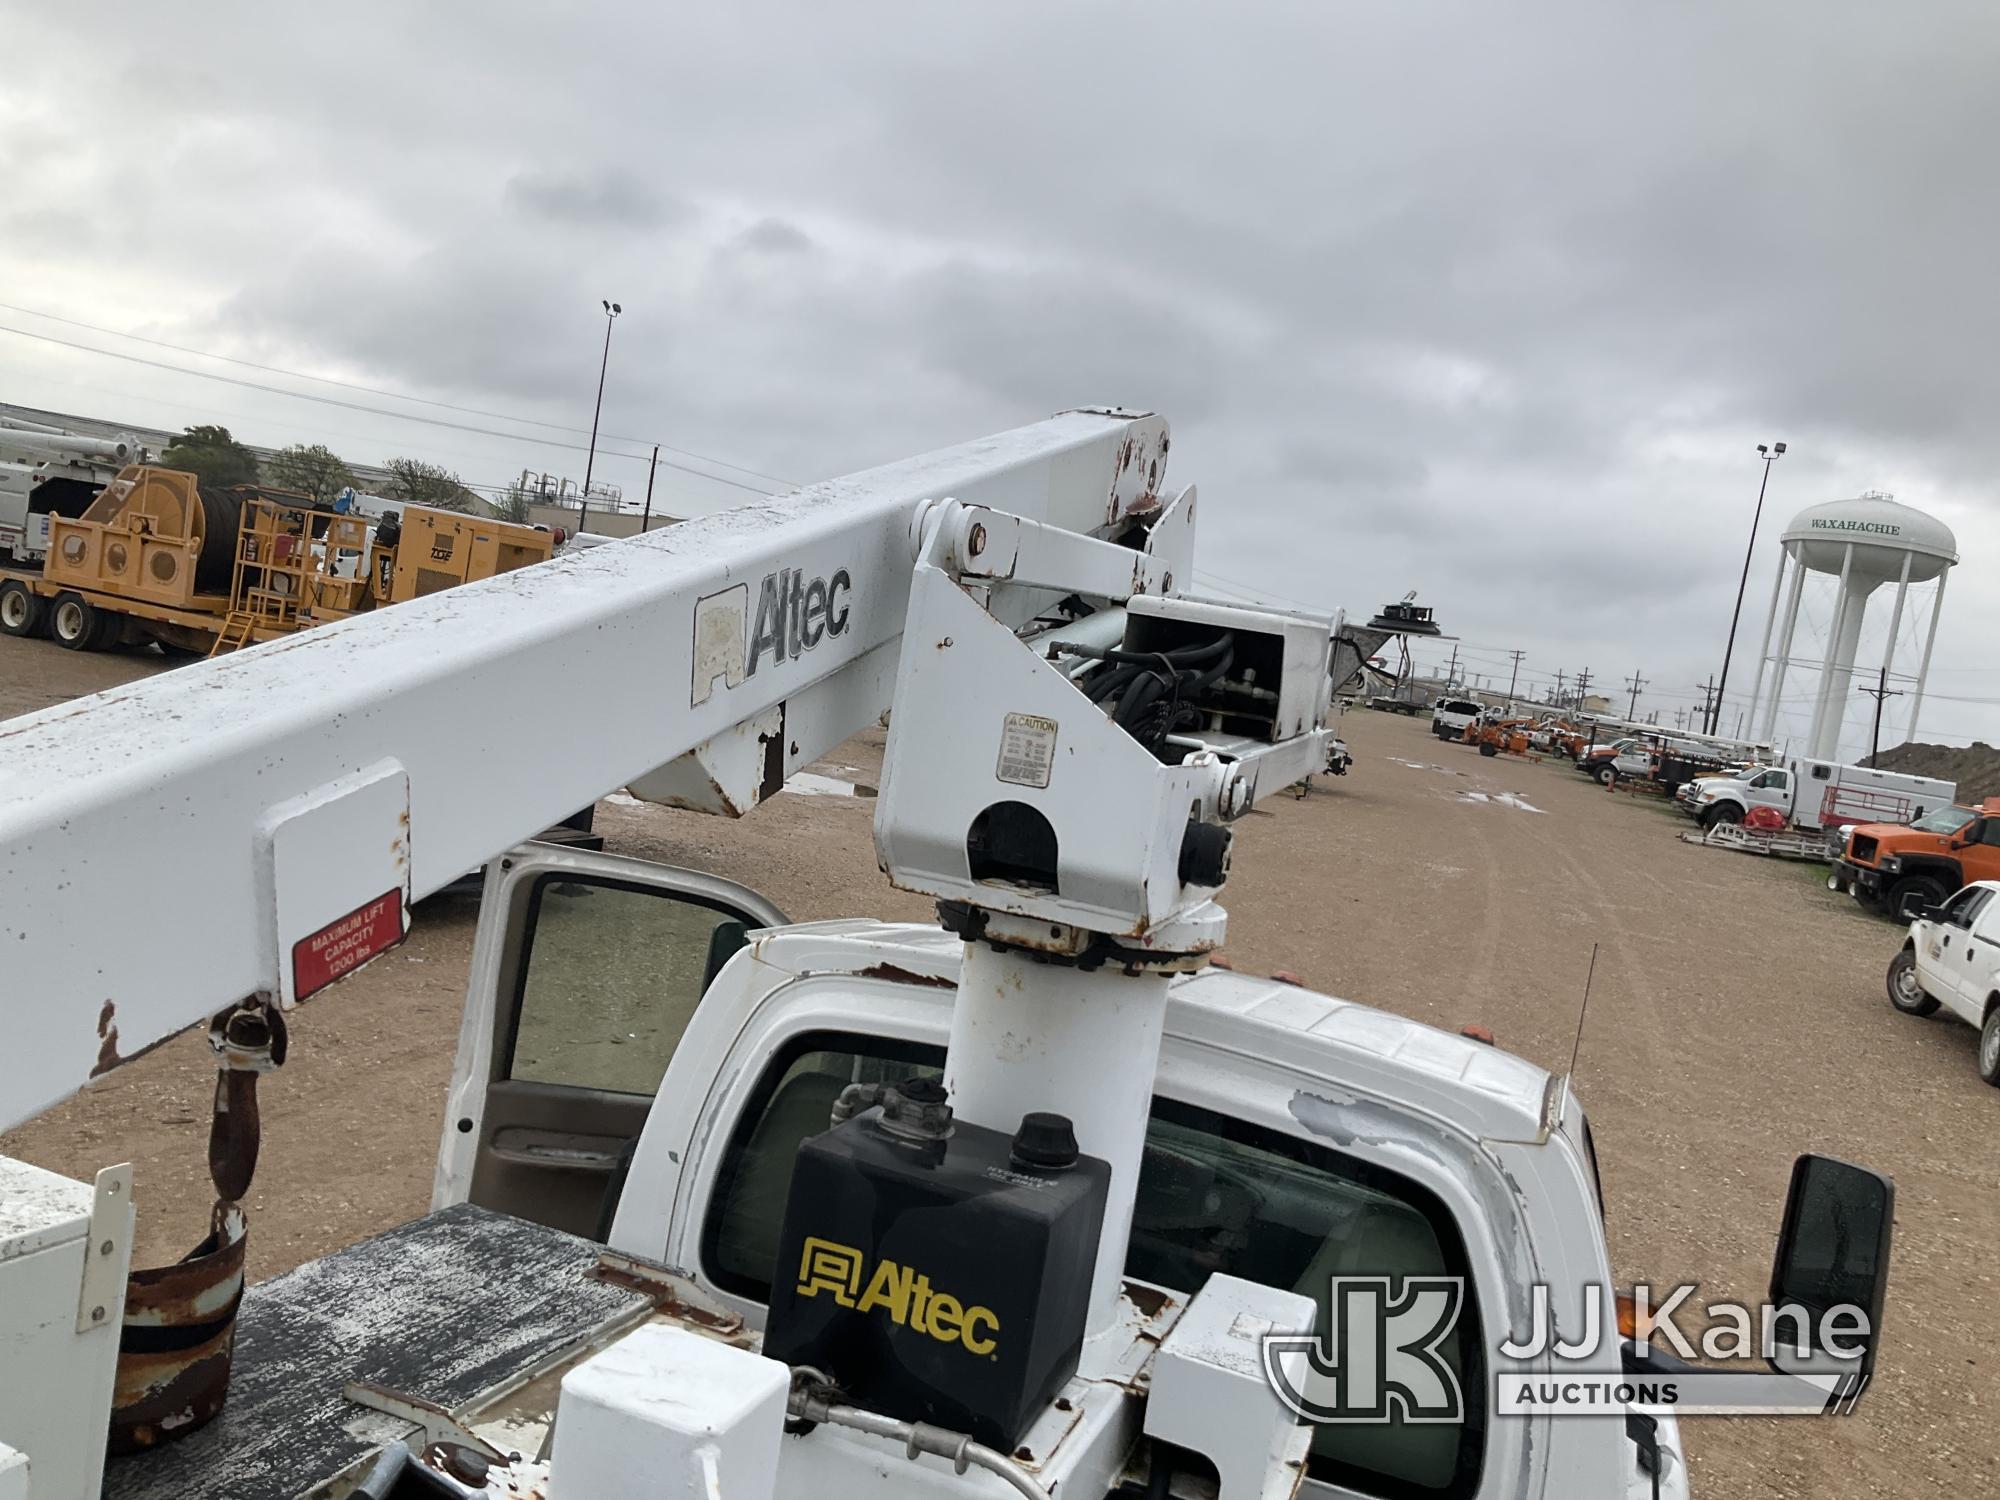 (Waxahachie, TX) Altec AT235-P, Articulating & Telescopic Non-Insulated Bucket Truck mounted behind